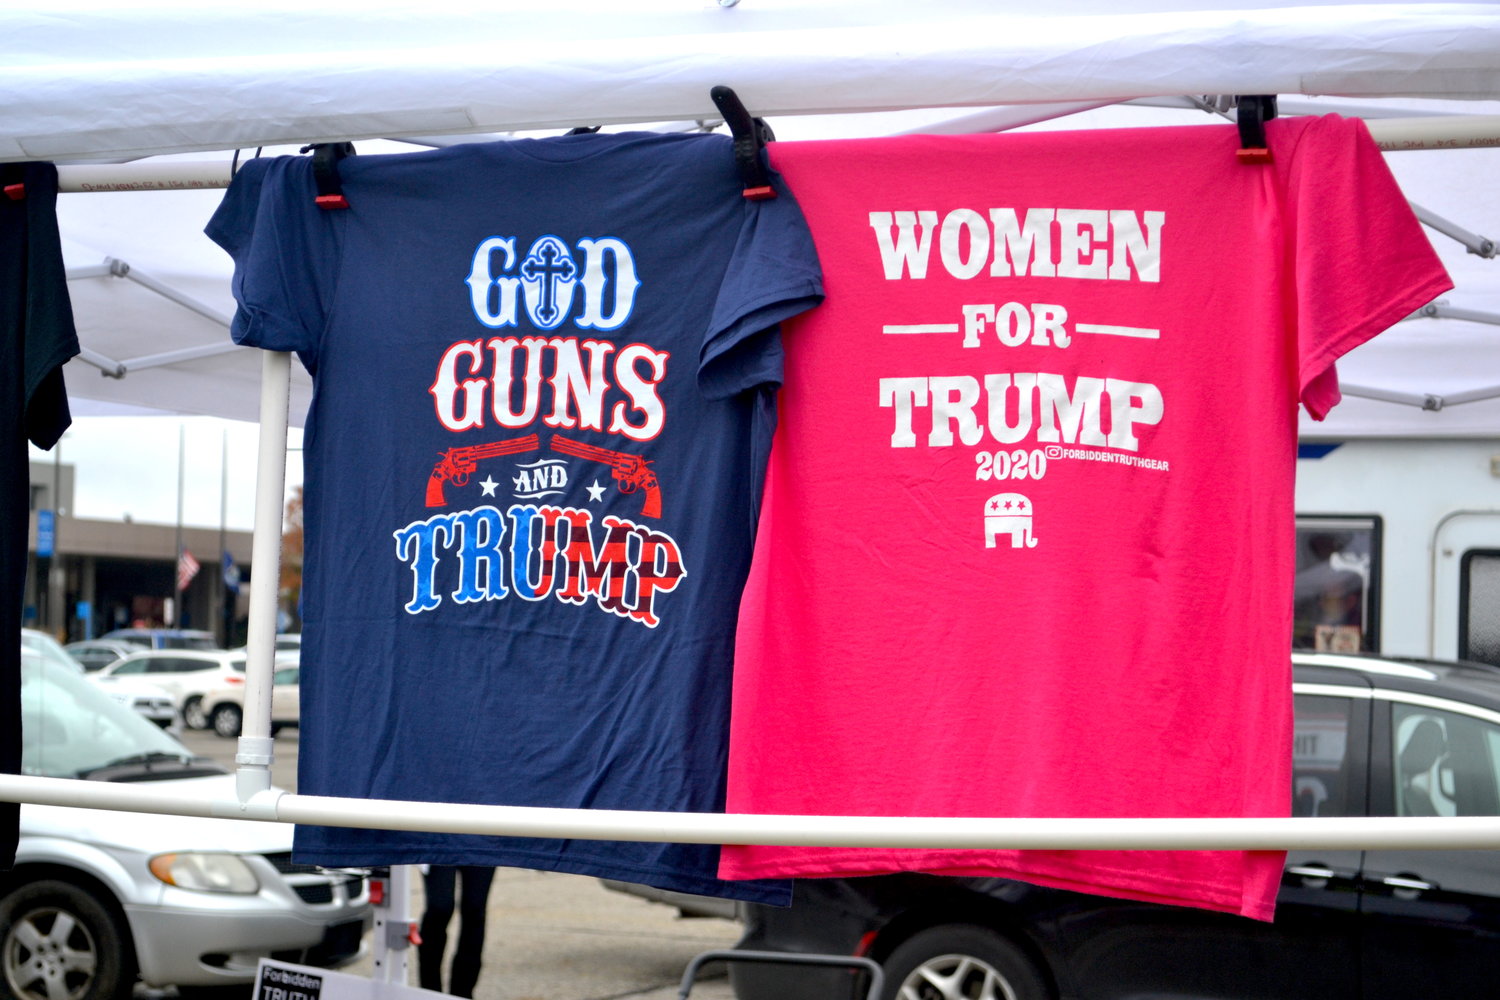 Some of the merchandise for sale at the Trump rally.